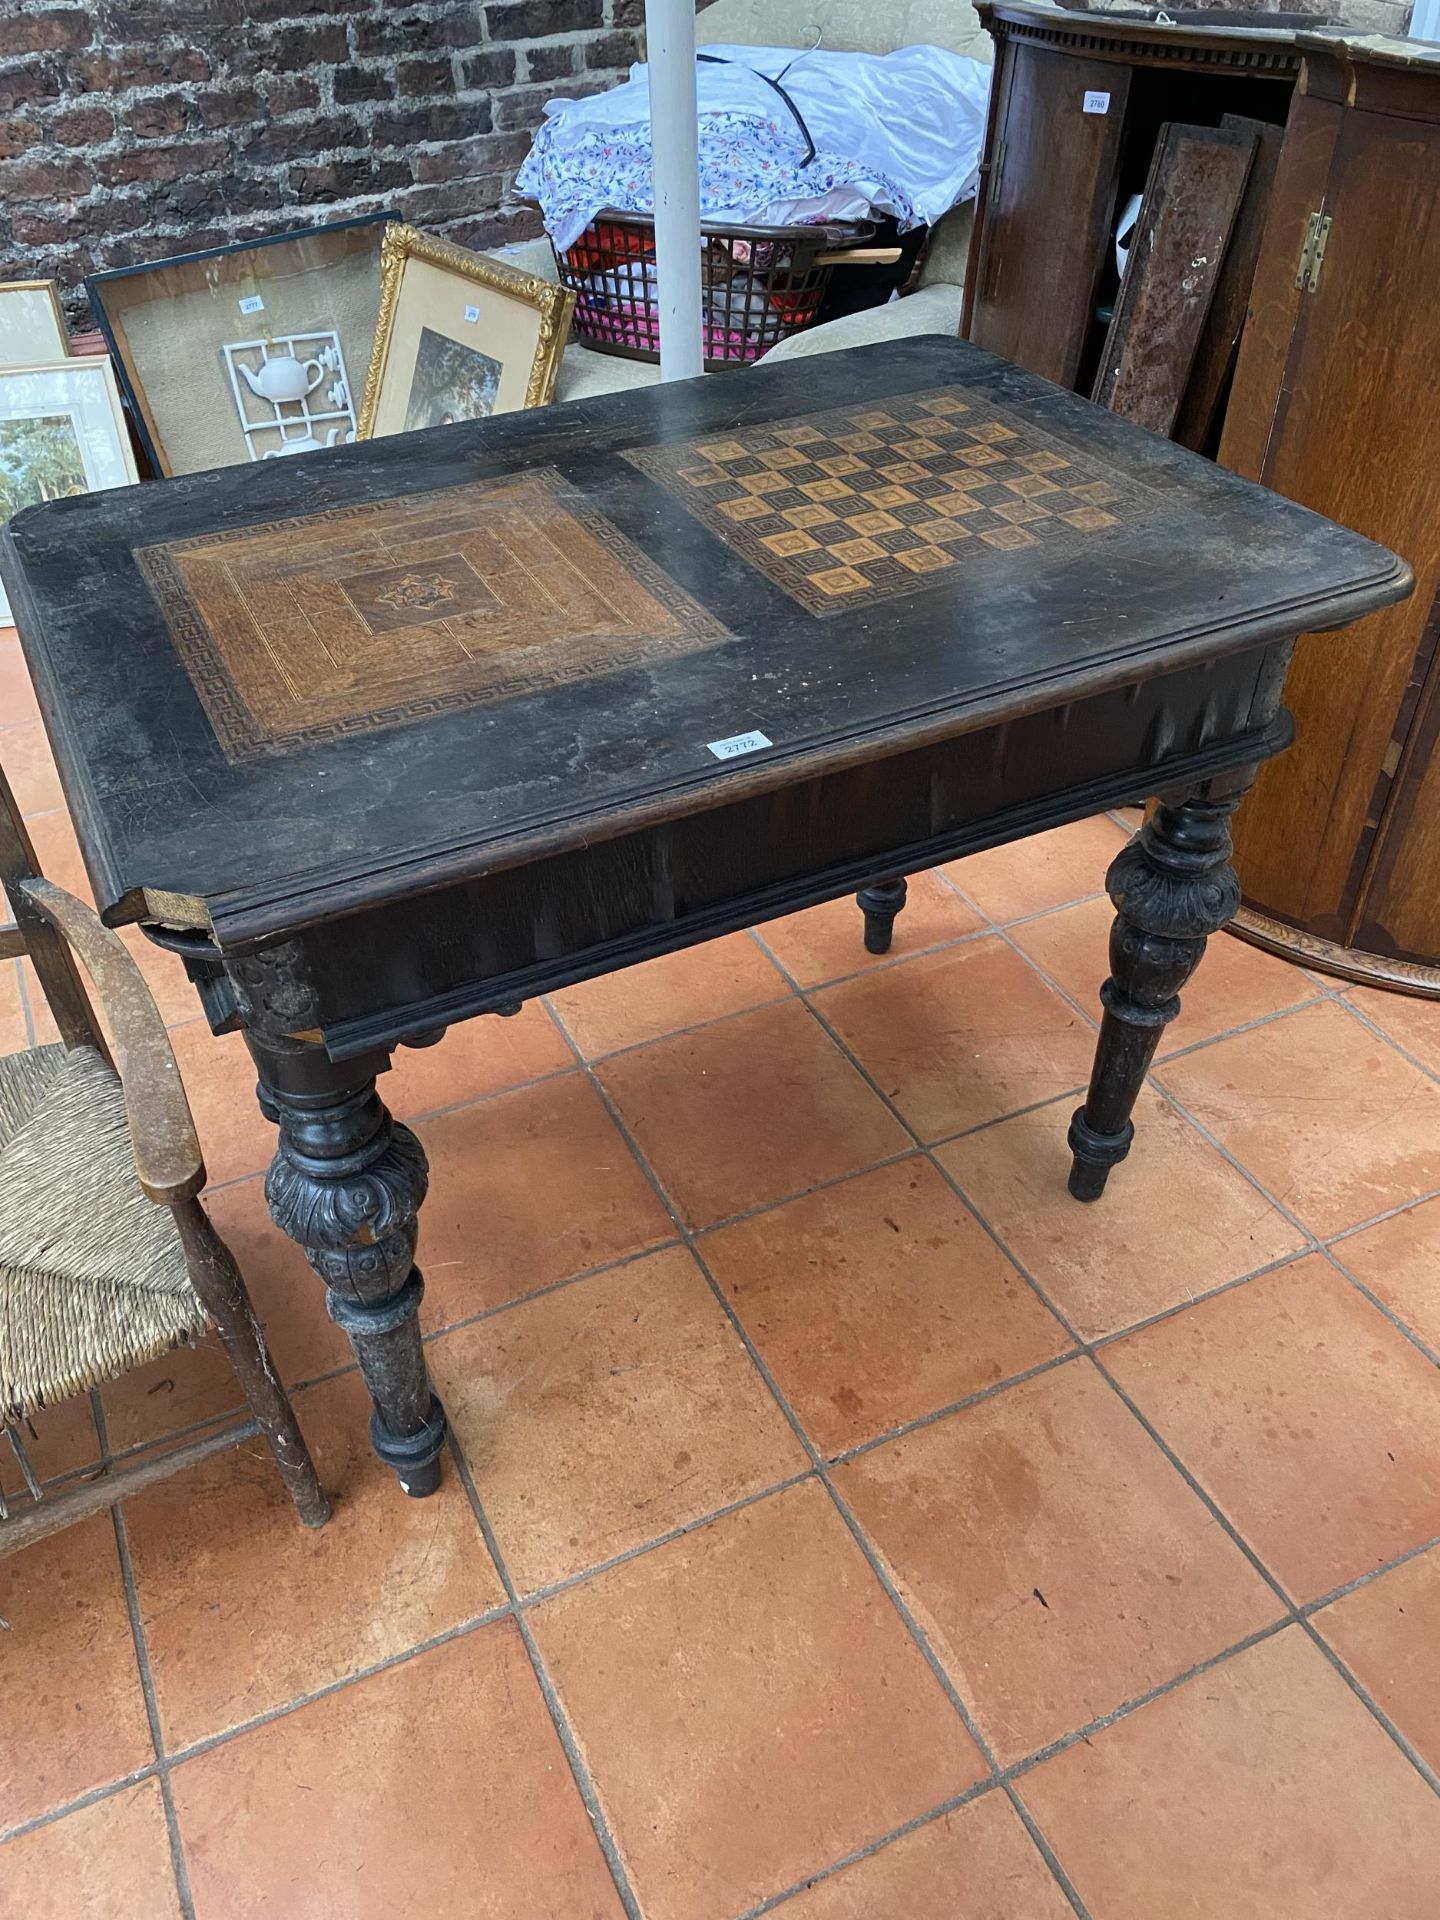 A VICTORIAN EBONISED GAMES TABLE WITH CHESS BOARD TOP AND TWO DRAWERS ON CARVED SUPPORTS 100CM X